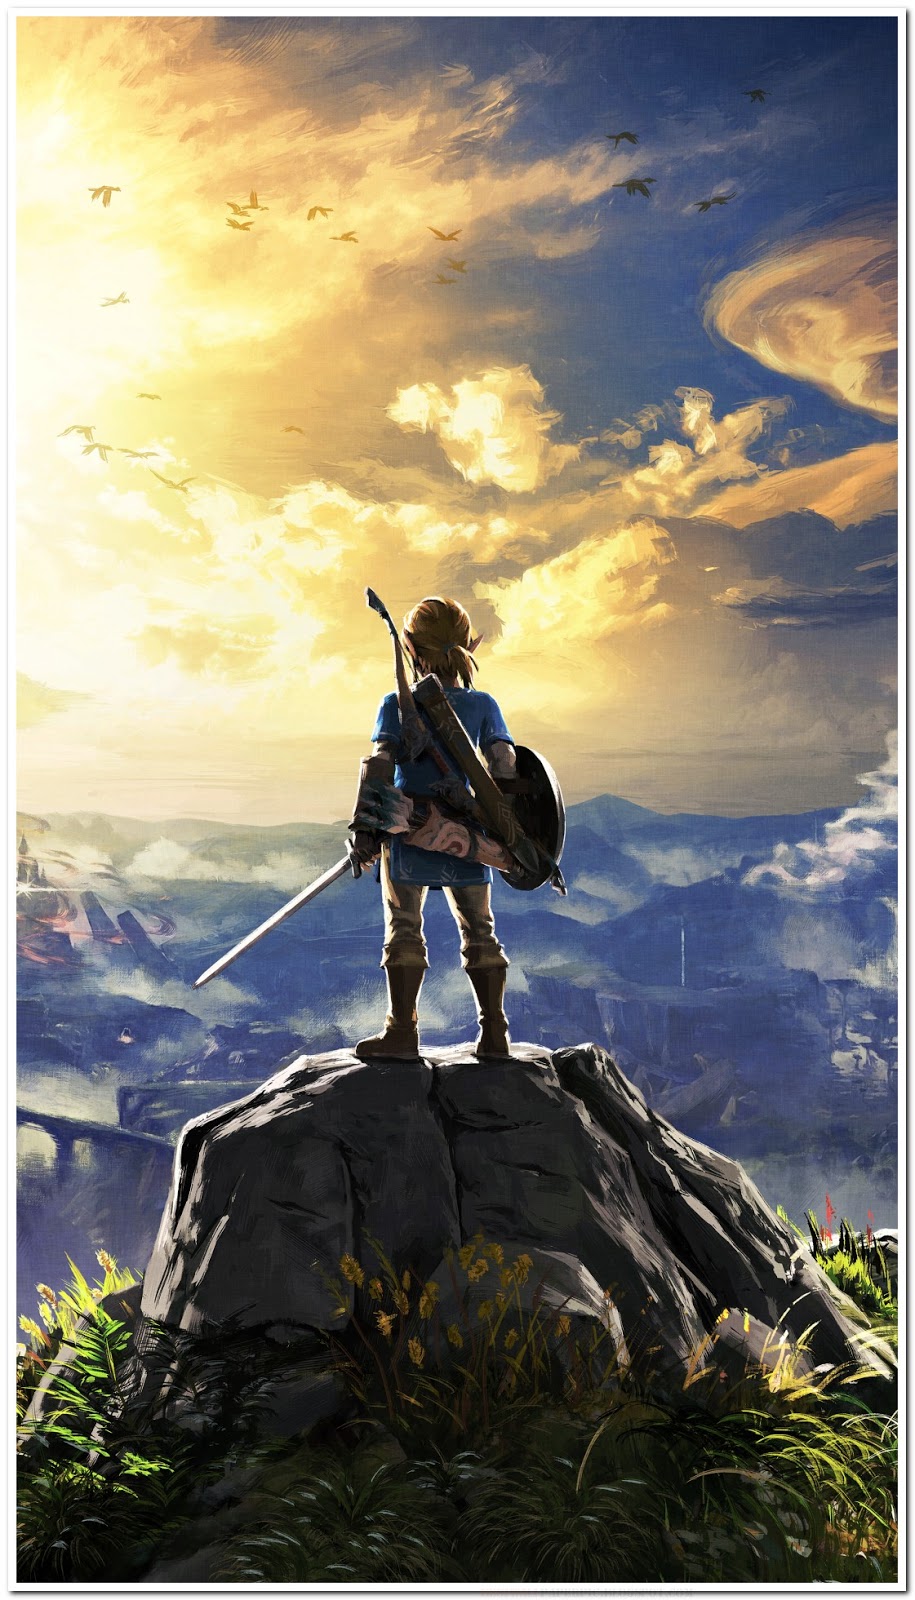 zelda breath of the wild download for android